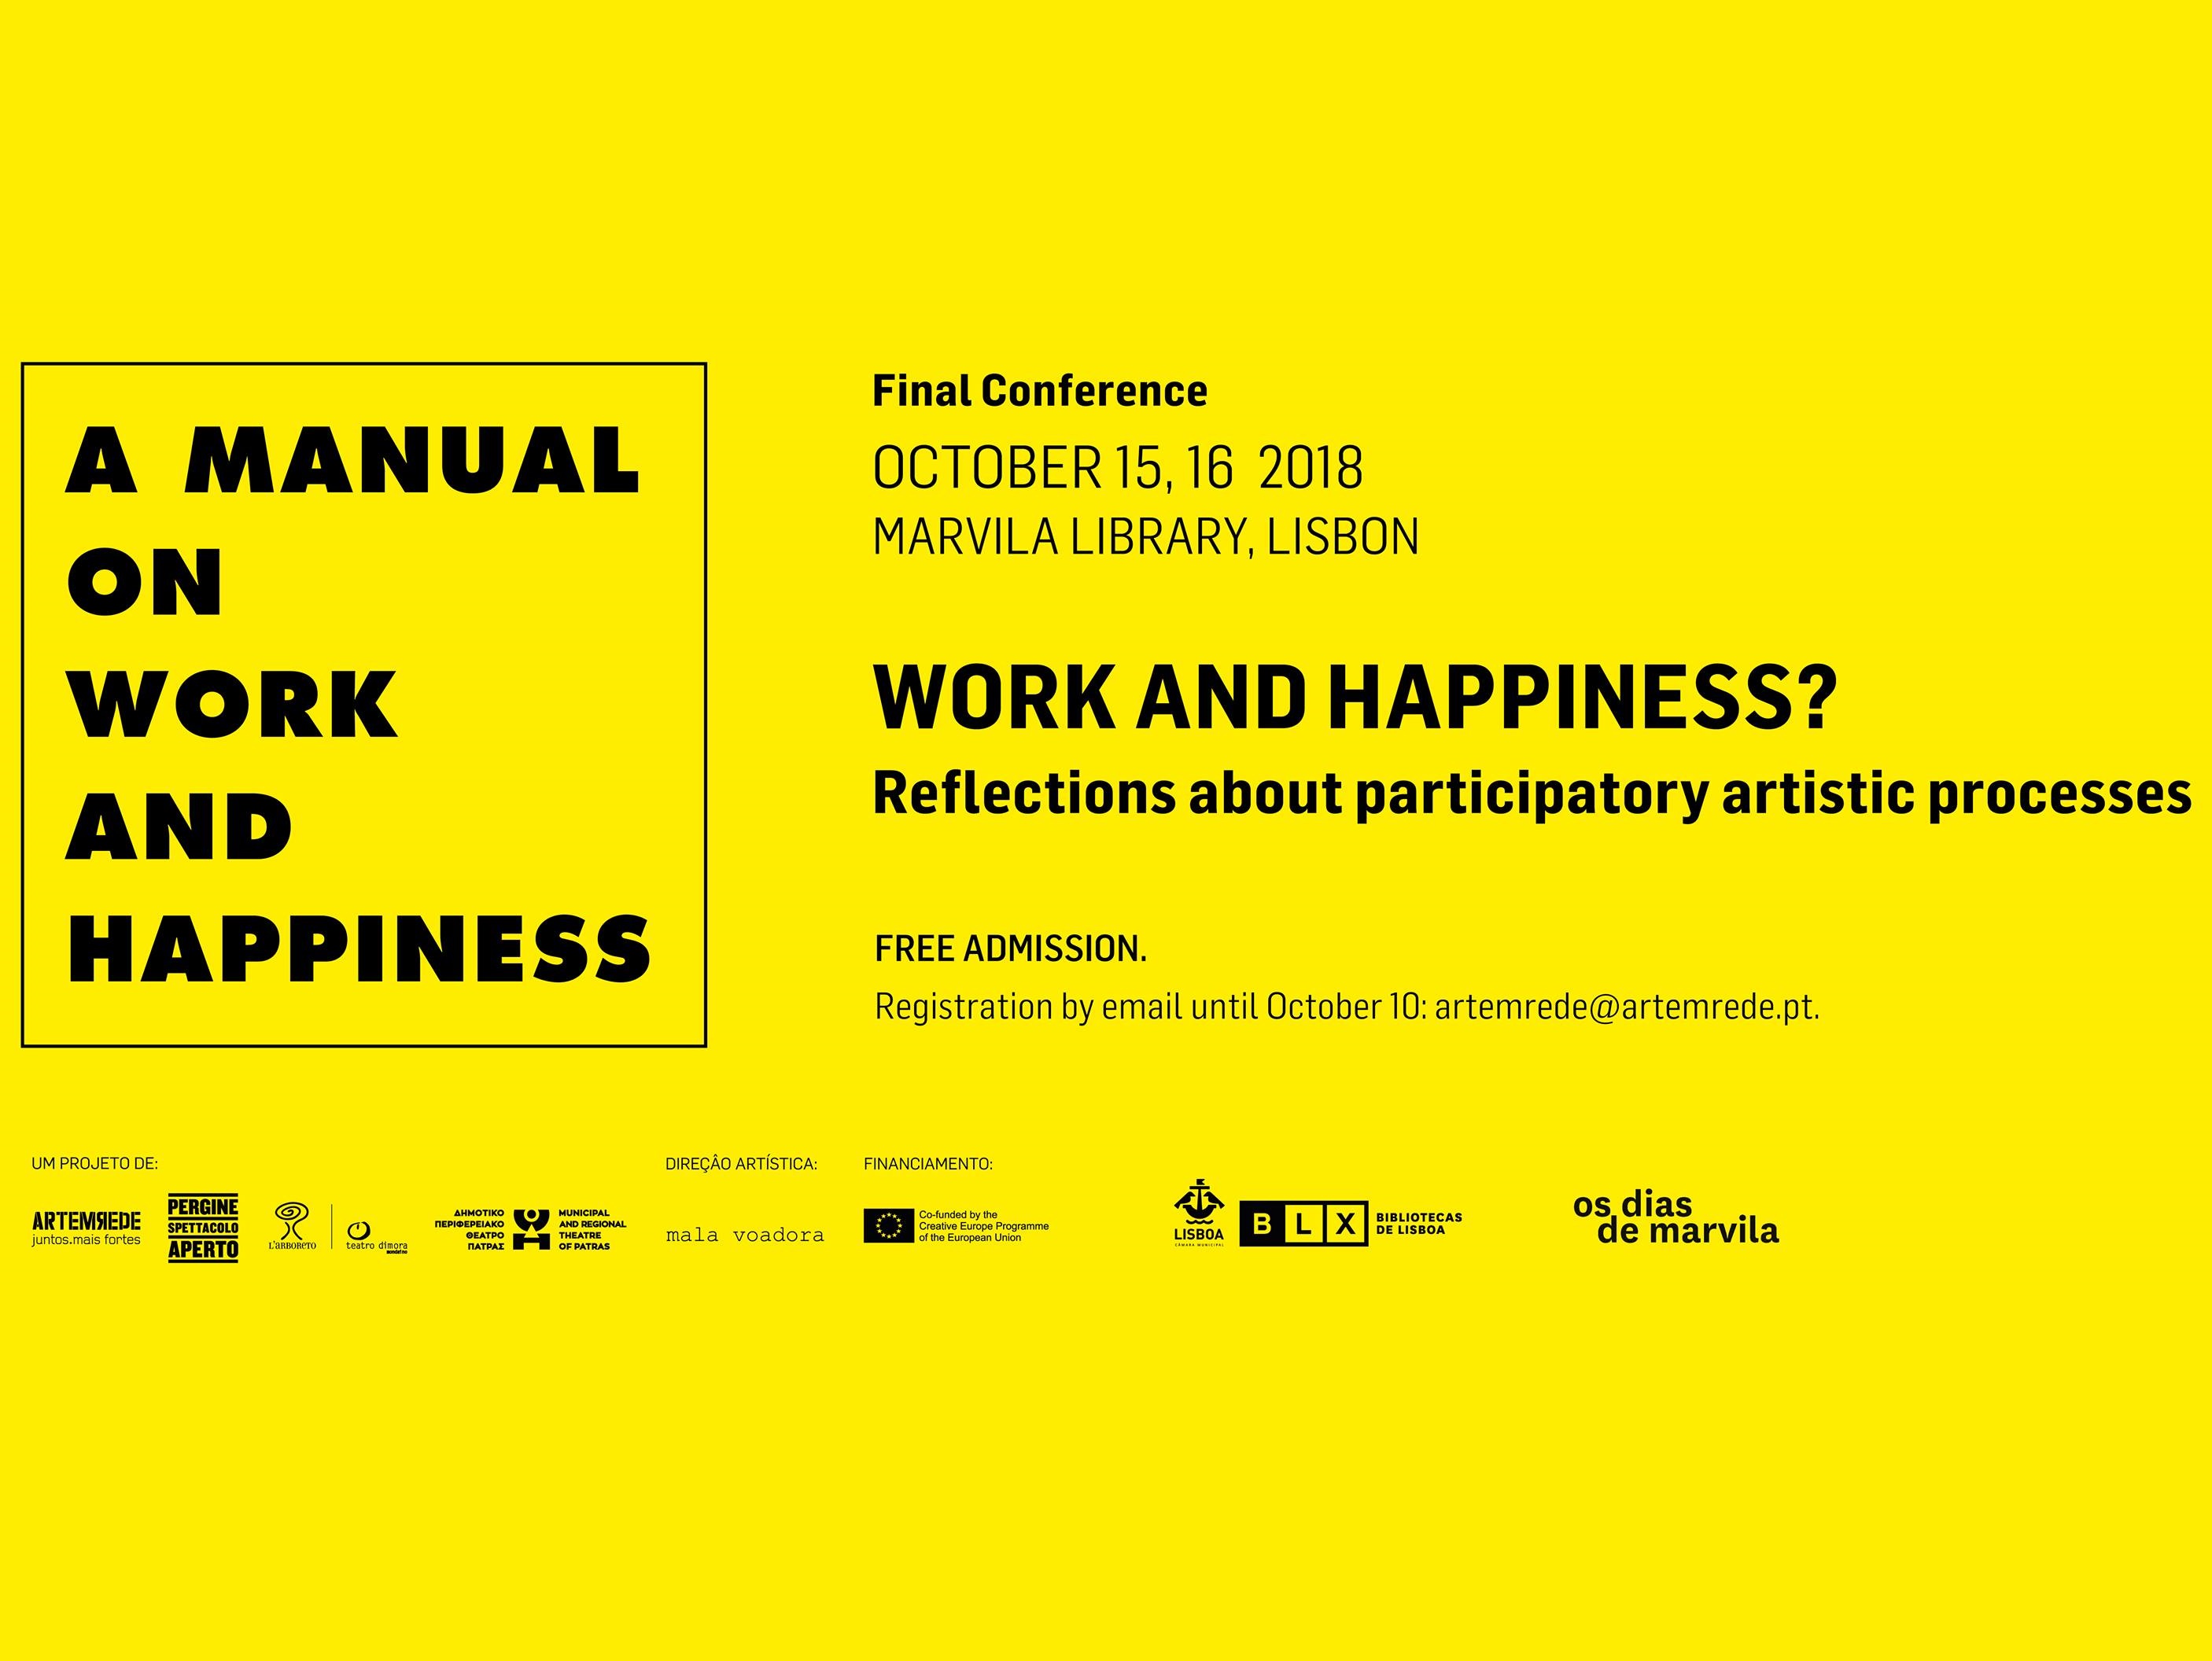 A MANUAL ON WORK AND HAPPINESS